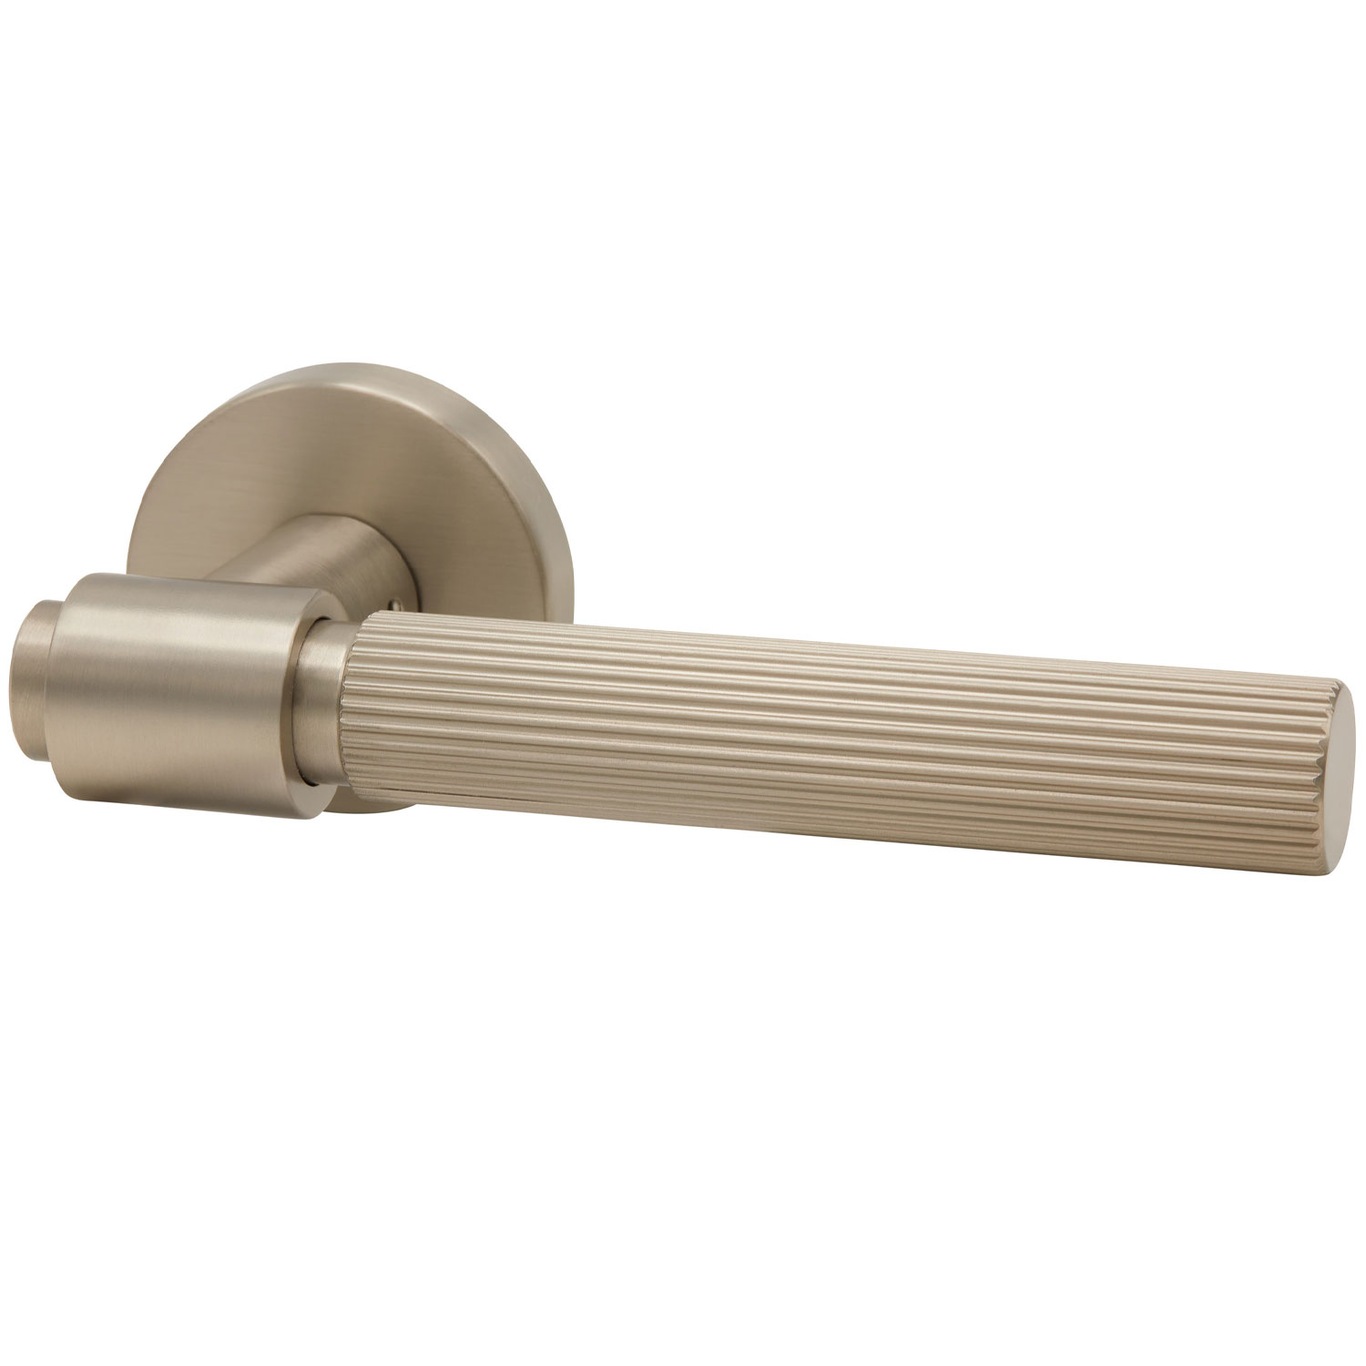 Helix Stripe 200 Door Handle With Keyhole, Stainless Look